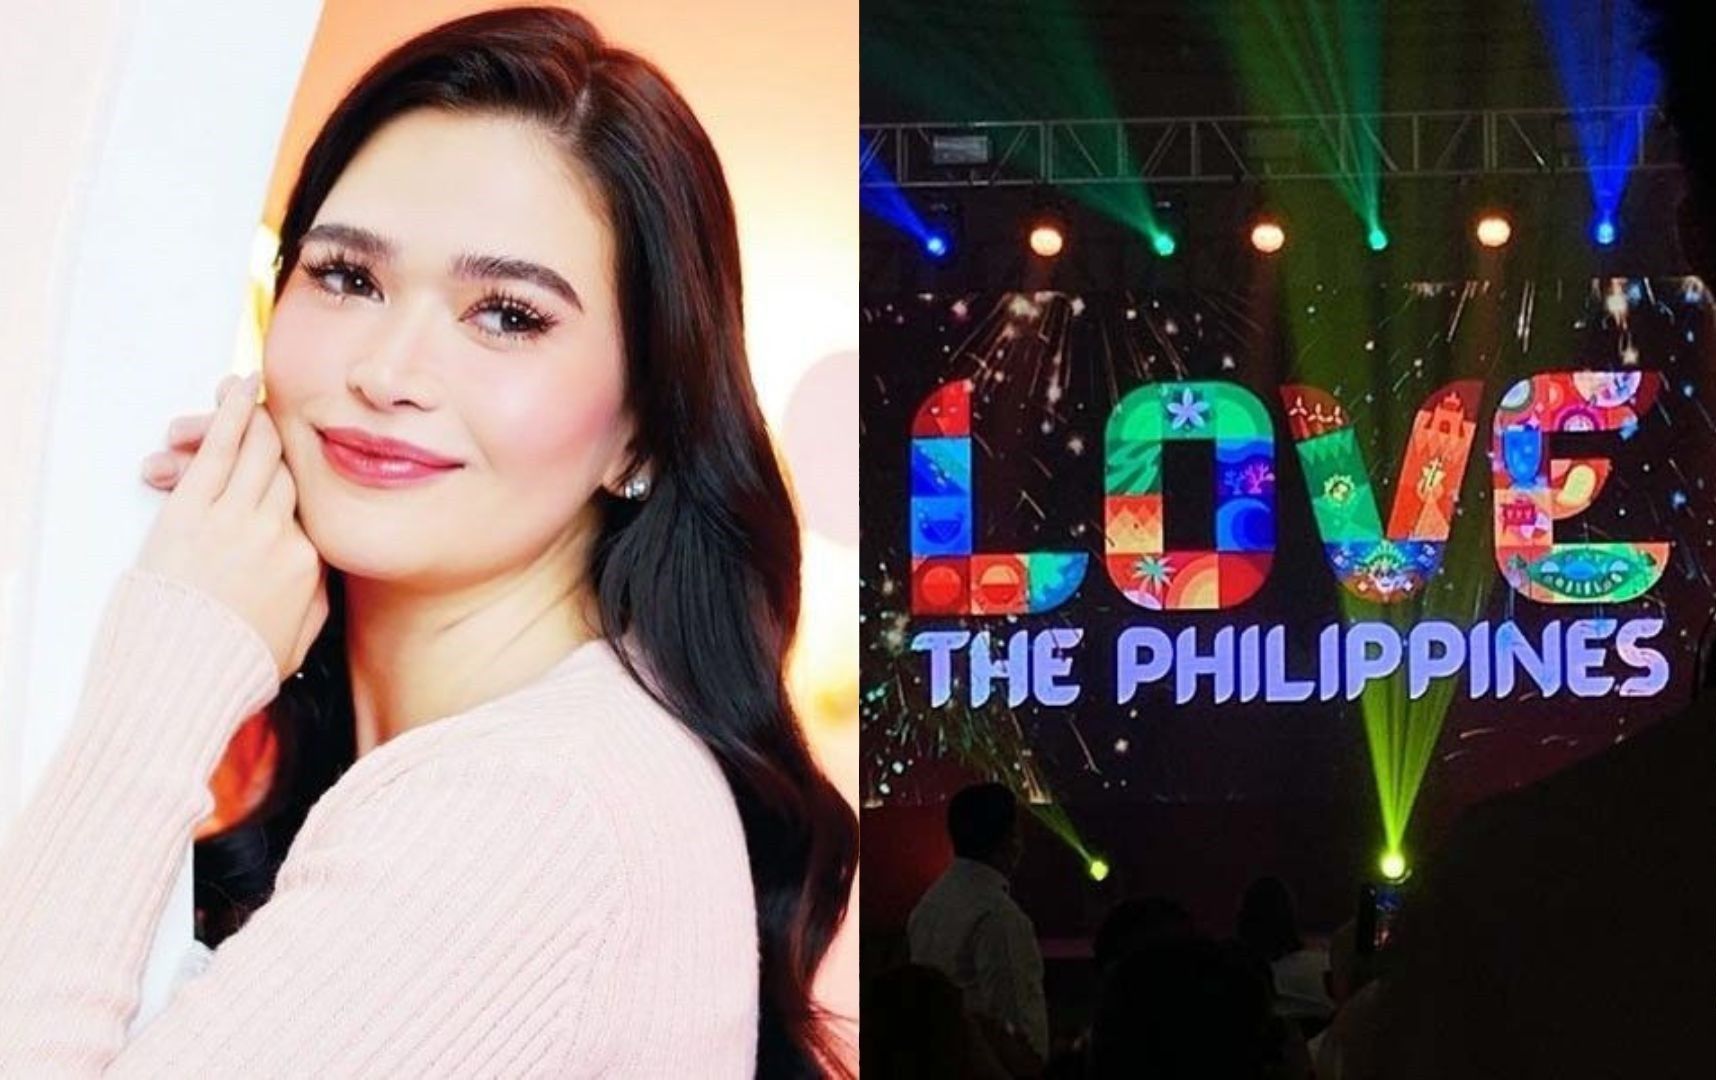 'Wasted opportunity': Bela Padilla offers suggestion over 'Love the Philippines' tourism campaign mess